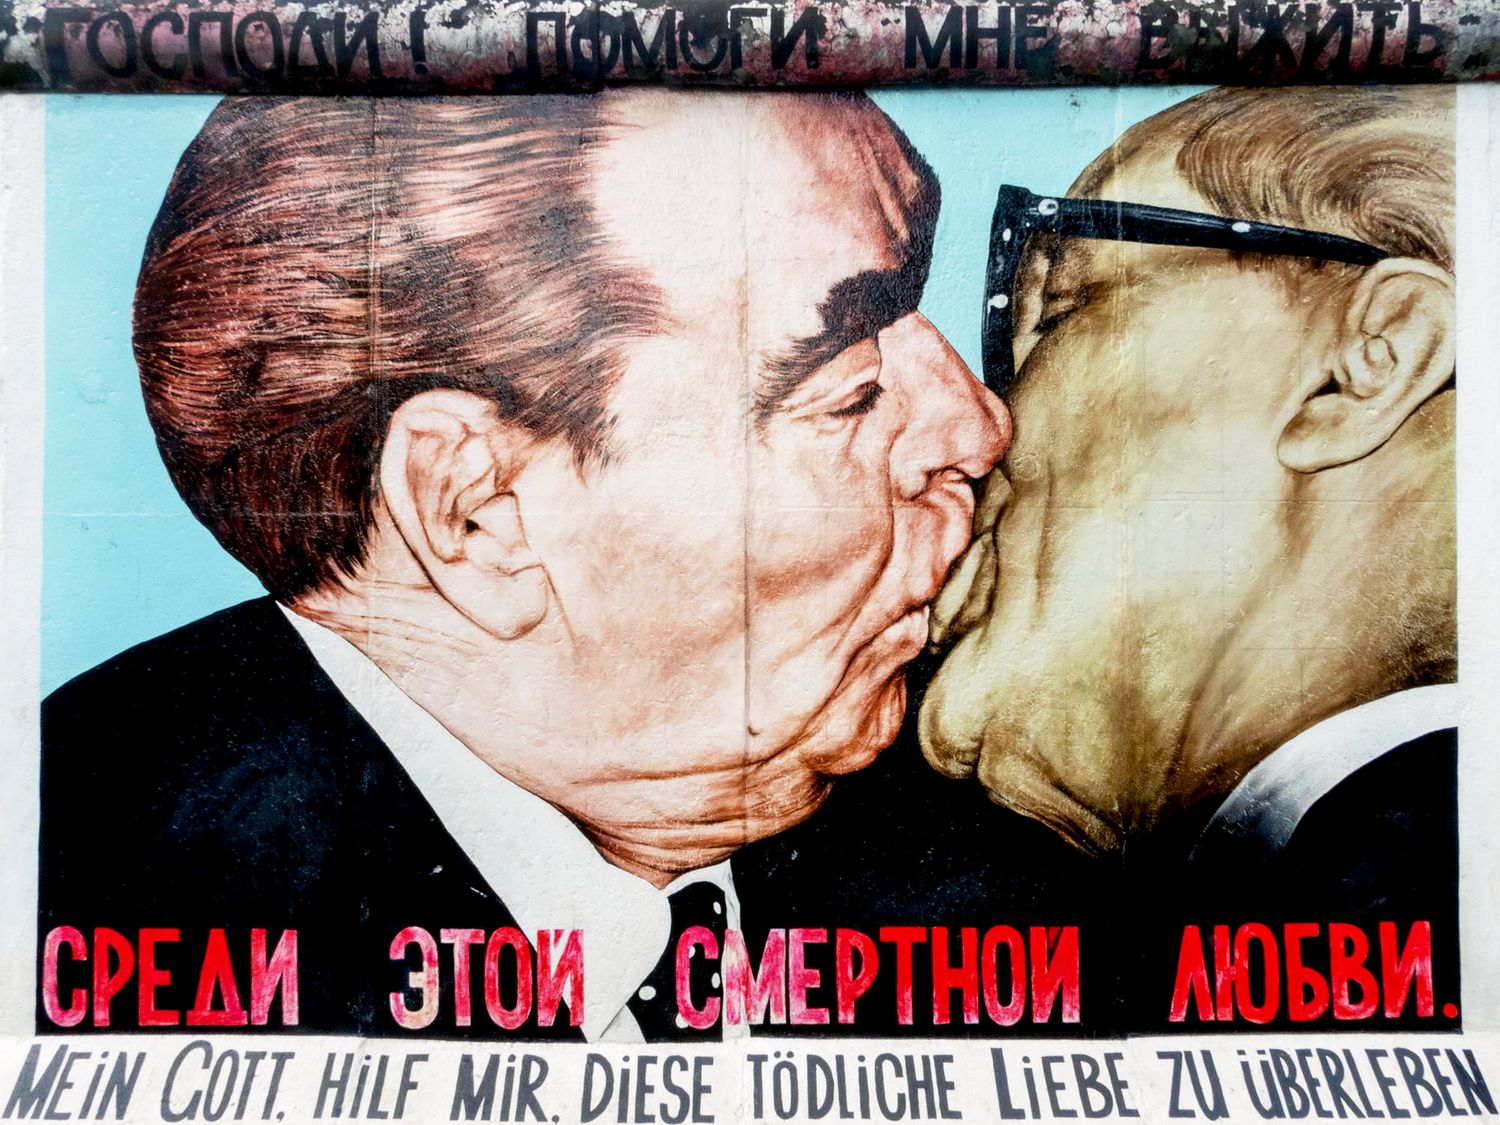 The fall of the Berlin Wall in 1989 marked the end of an era but also the creation of a free artistic place throughout the East Side Gallery which has been taken over by many artists until today.